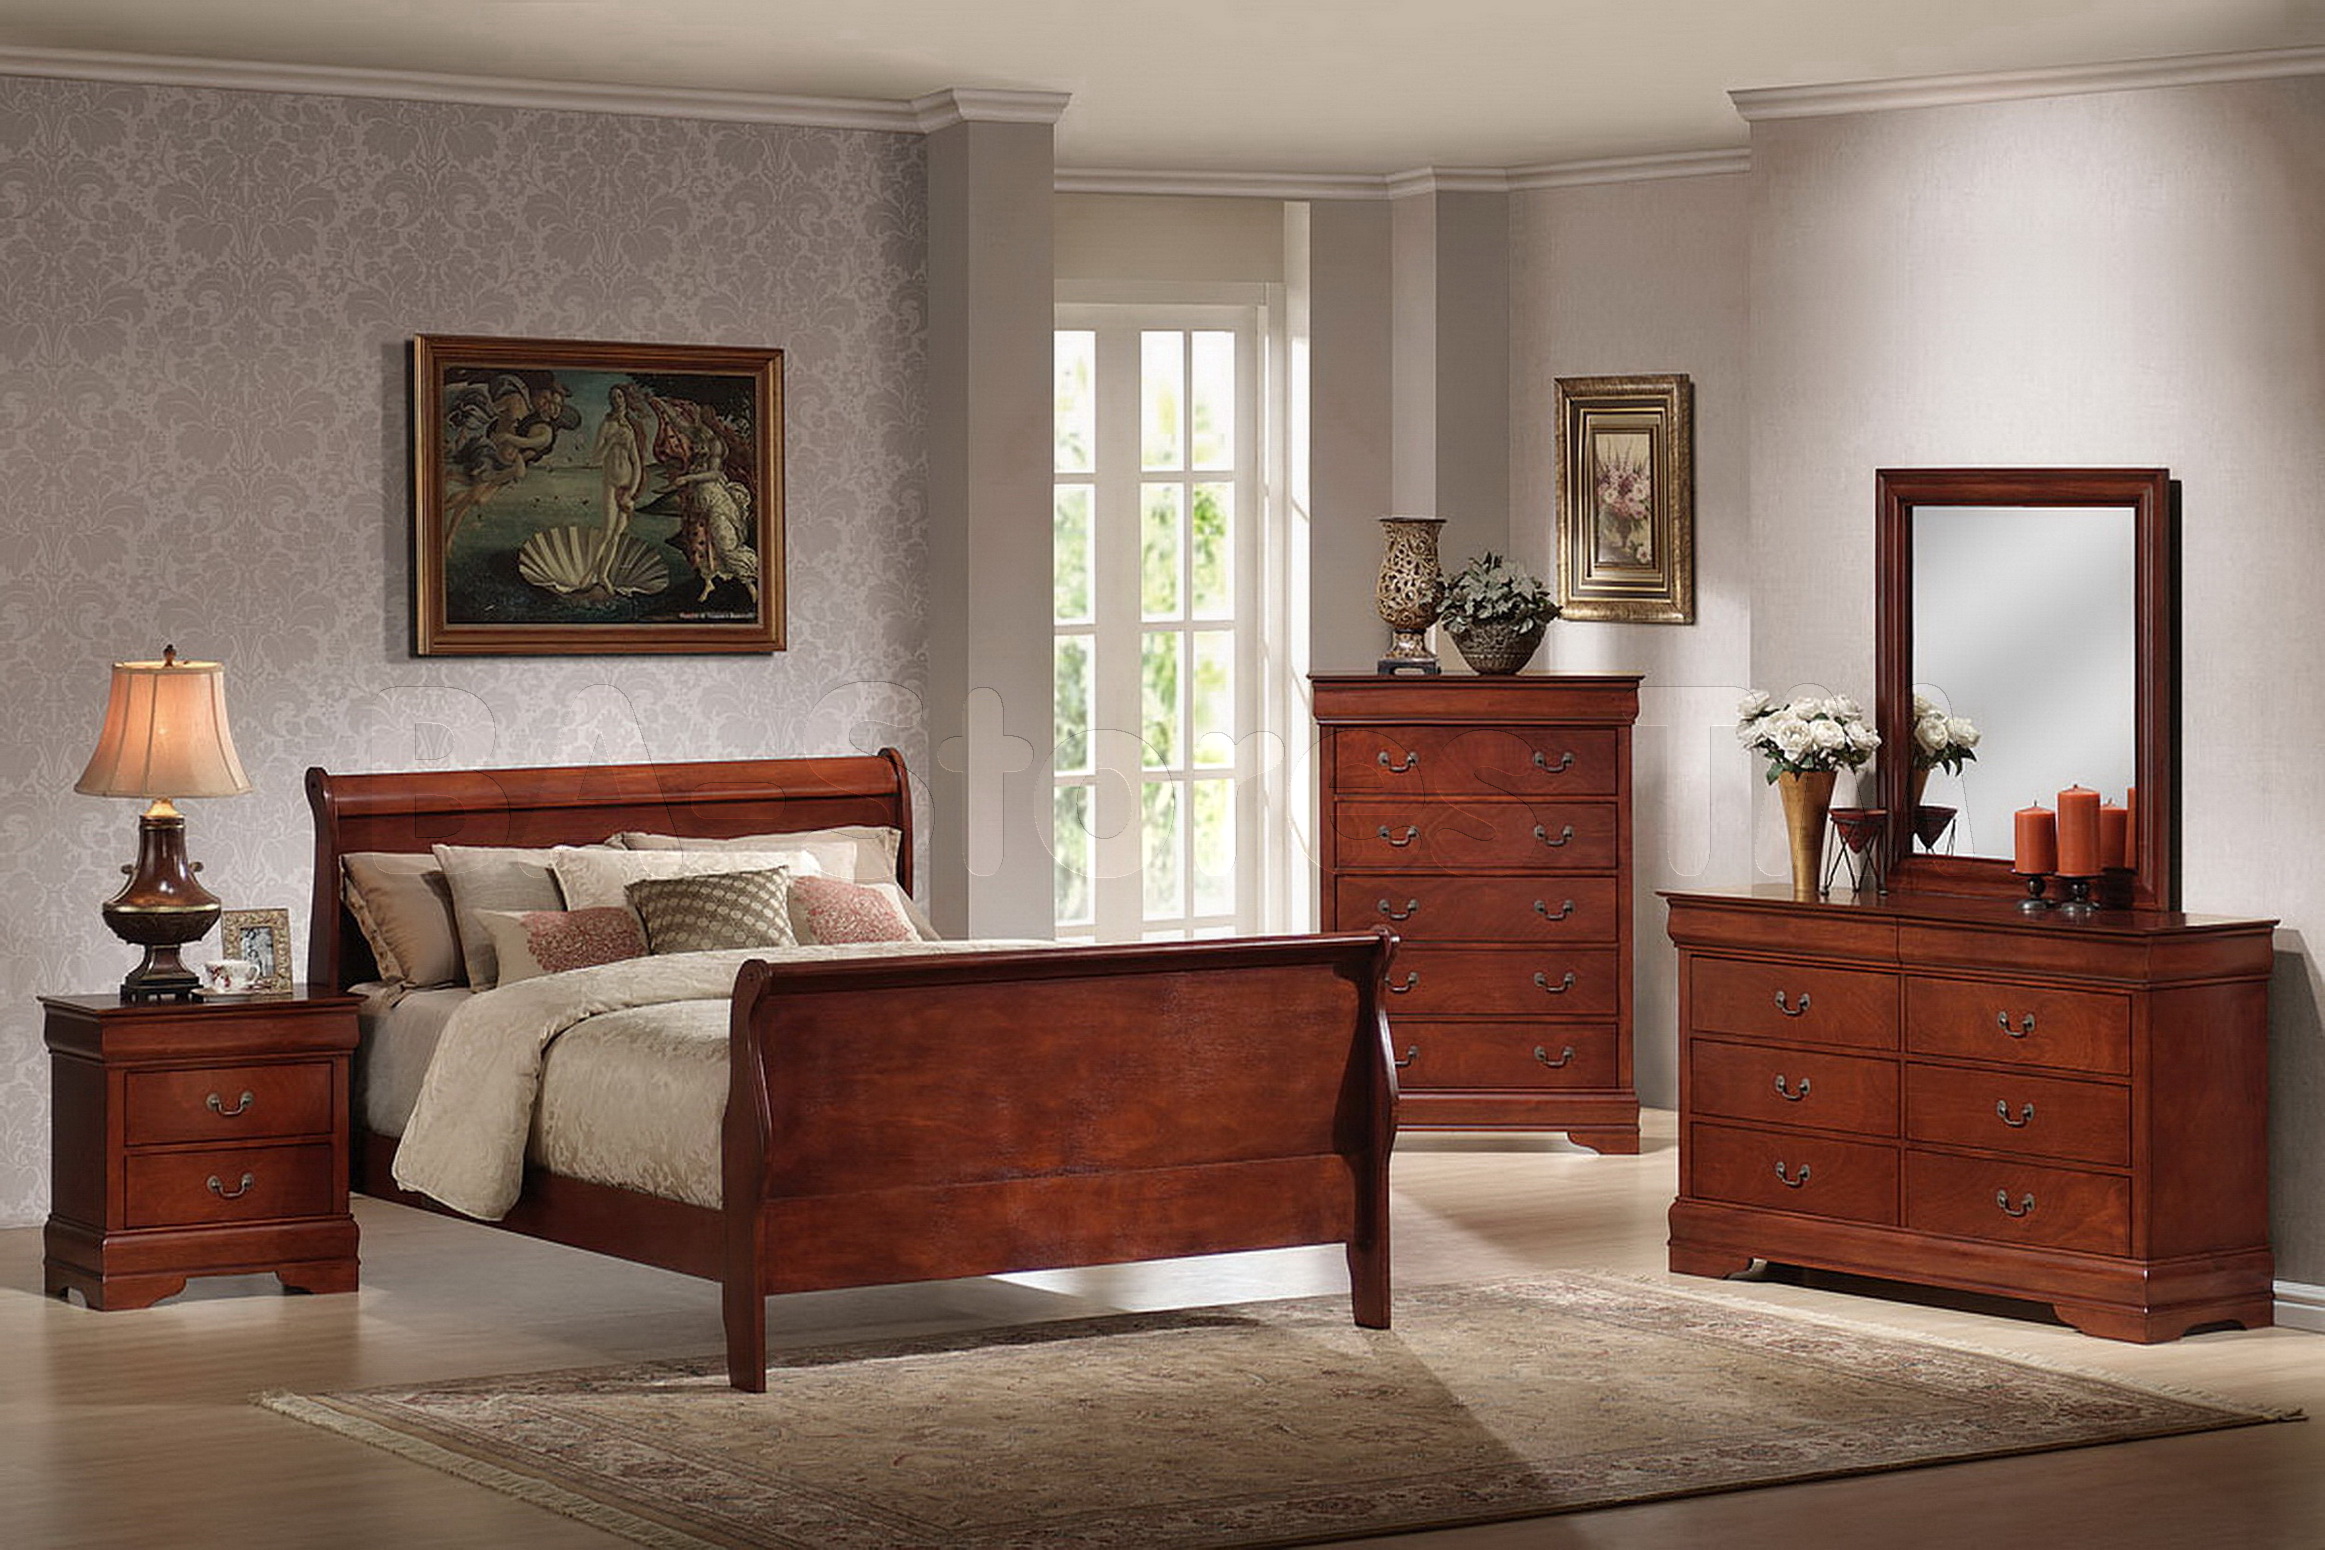 stag cherry wood bedroom furniture